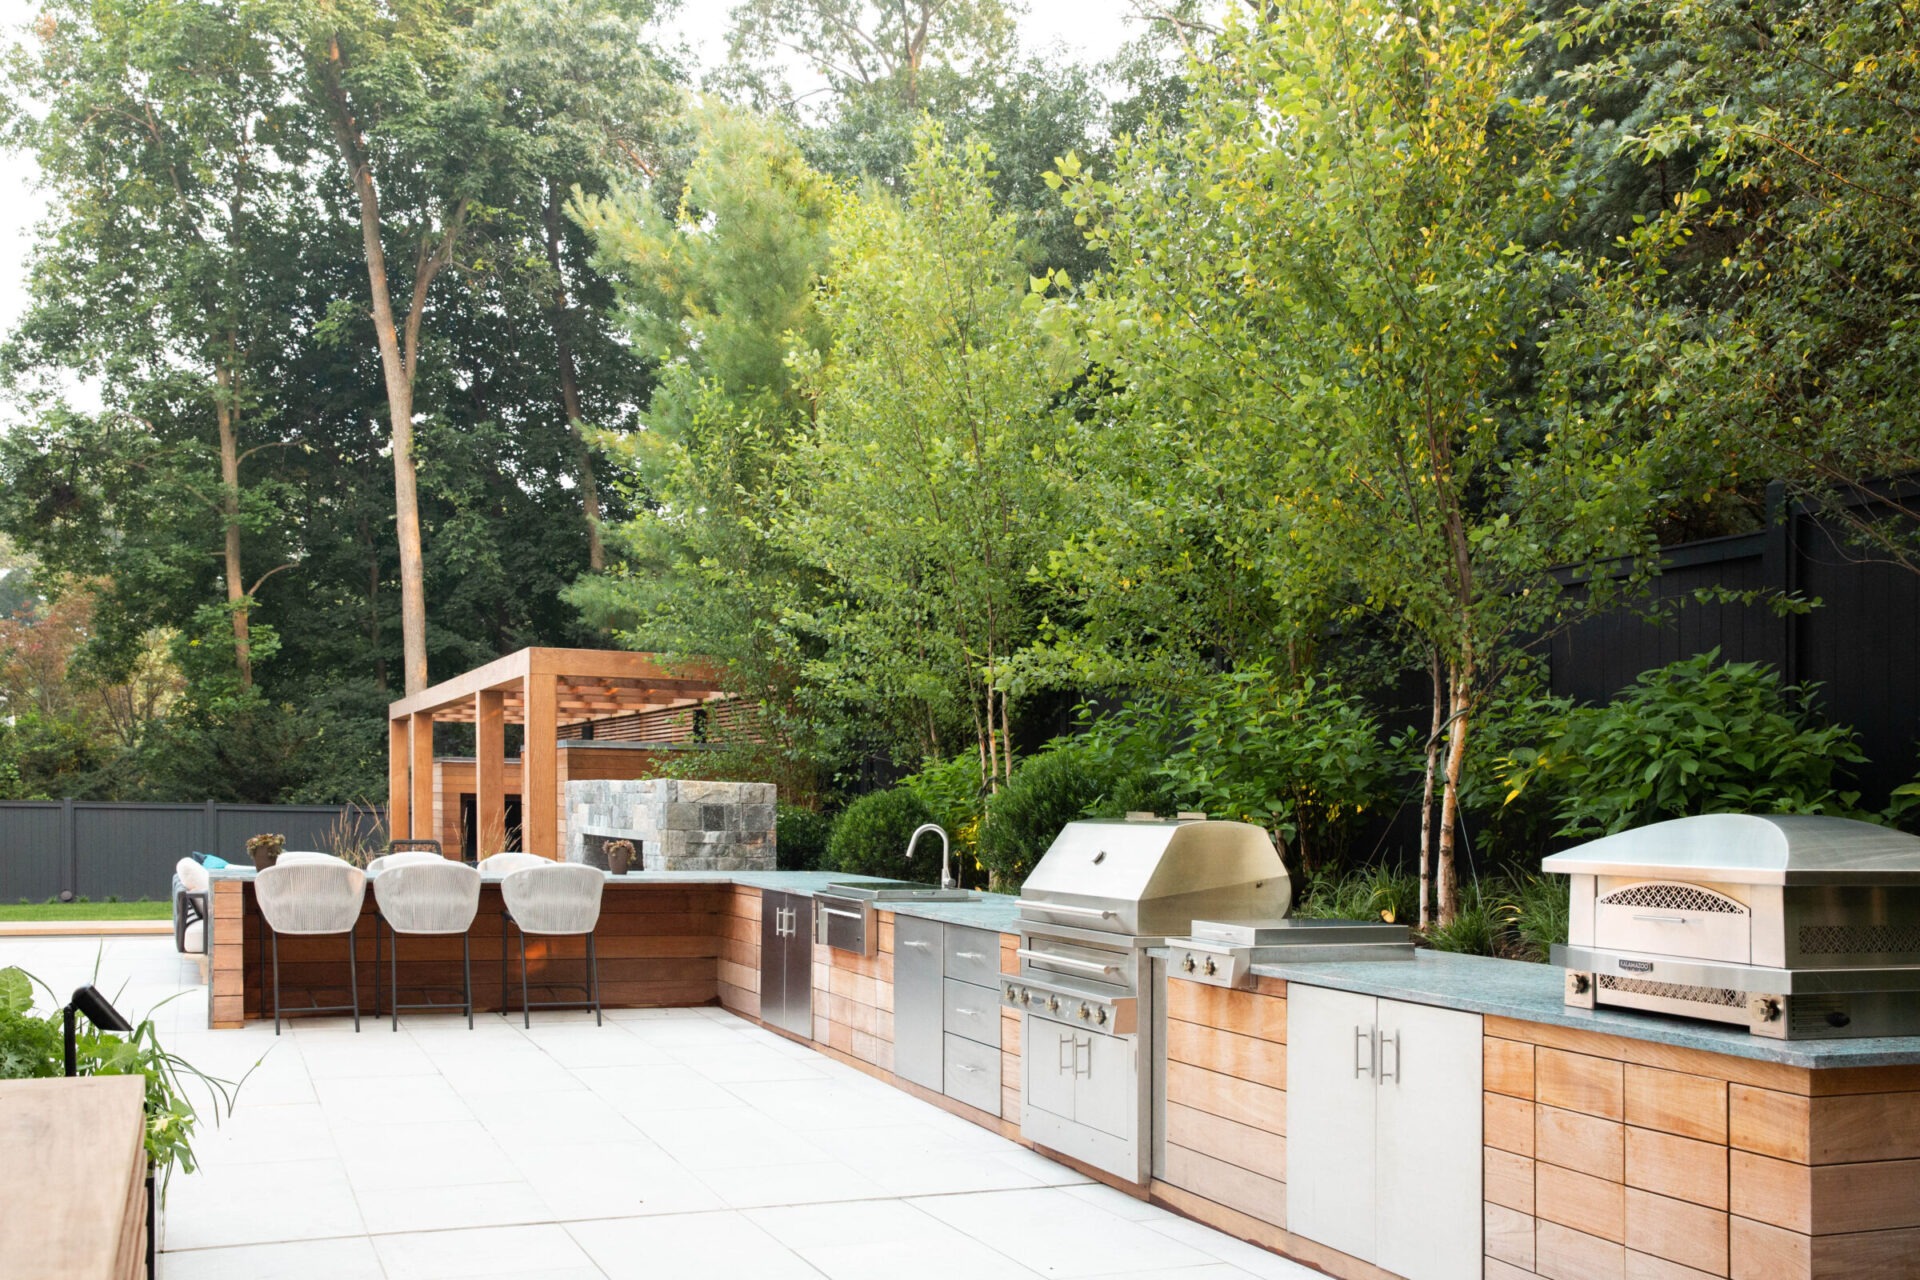 An outdoor kitchen with a pergola, modern appliances, and a bar seating area, set against a backdrop of green trees and a dark fence.